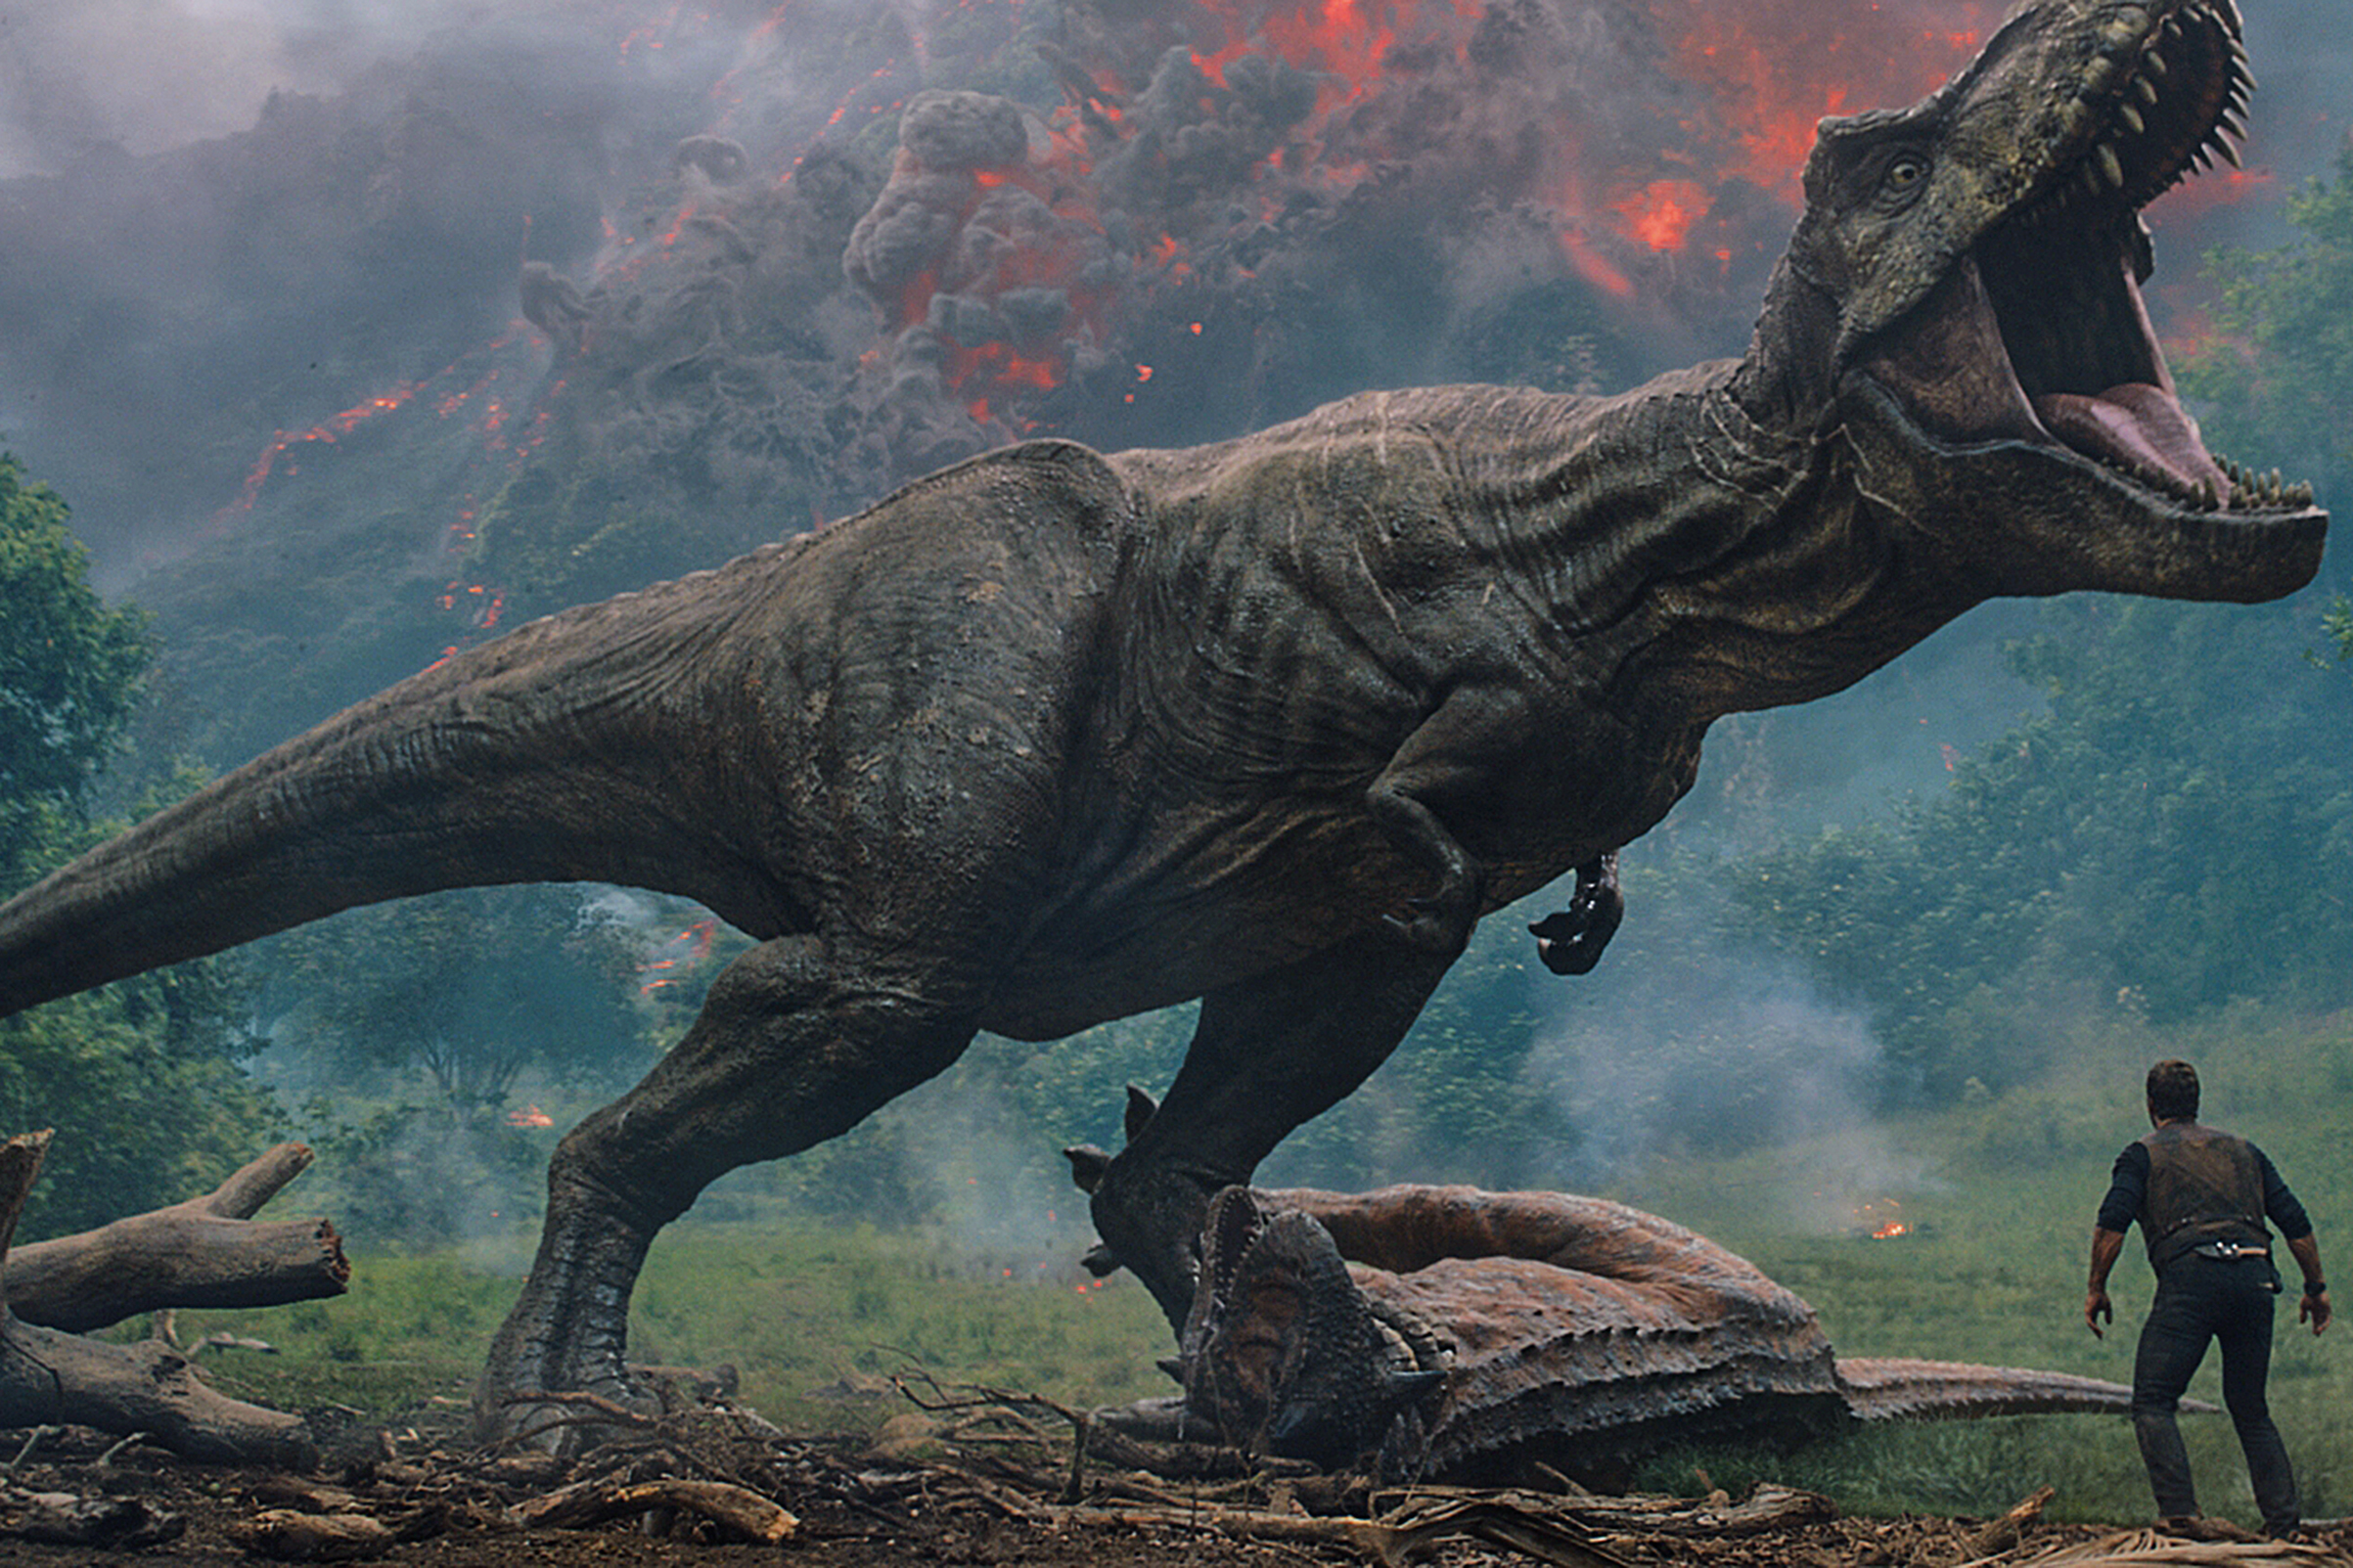 Owen, played by Chris Pratt, meets a vicious T. rex in <i>Jurassic World: Fallen Kingdom</i>. (Photo Credit: Universal Pictures&mdash;COPYRIGHT © 2018 UNIVERSAL STUDIOS and AMBLIN ENTERTAINMENT, INC.
                      and LEGENDARY PICTURES PRODUCTIONS, LLC.)